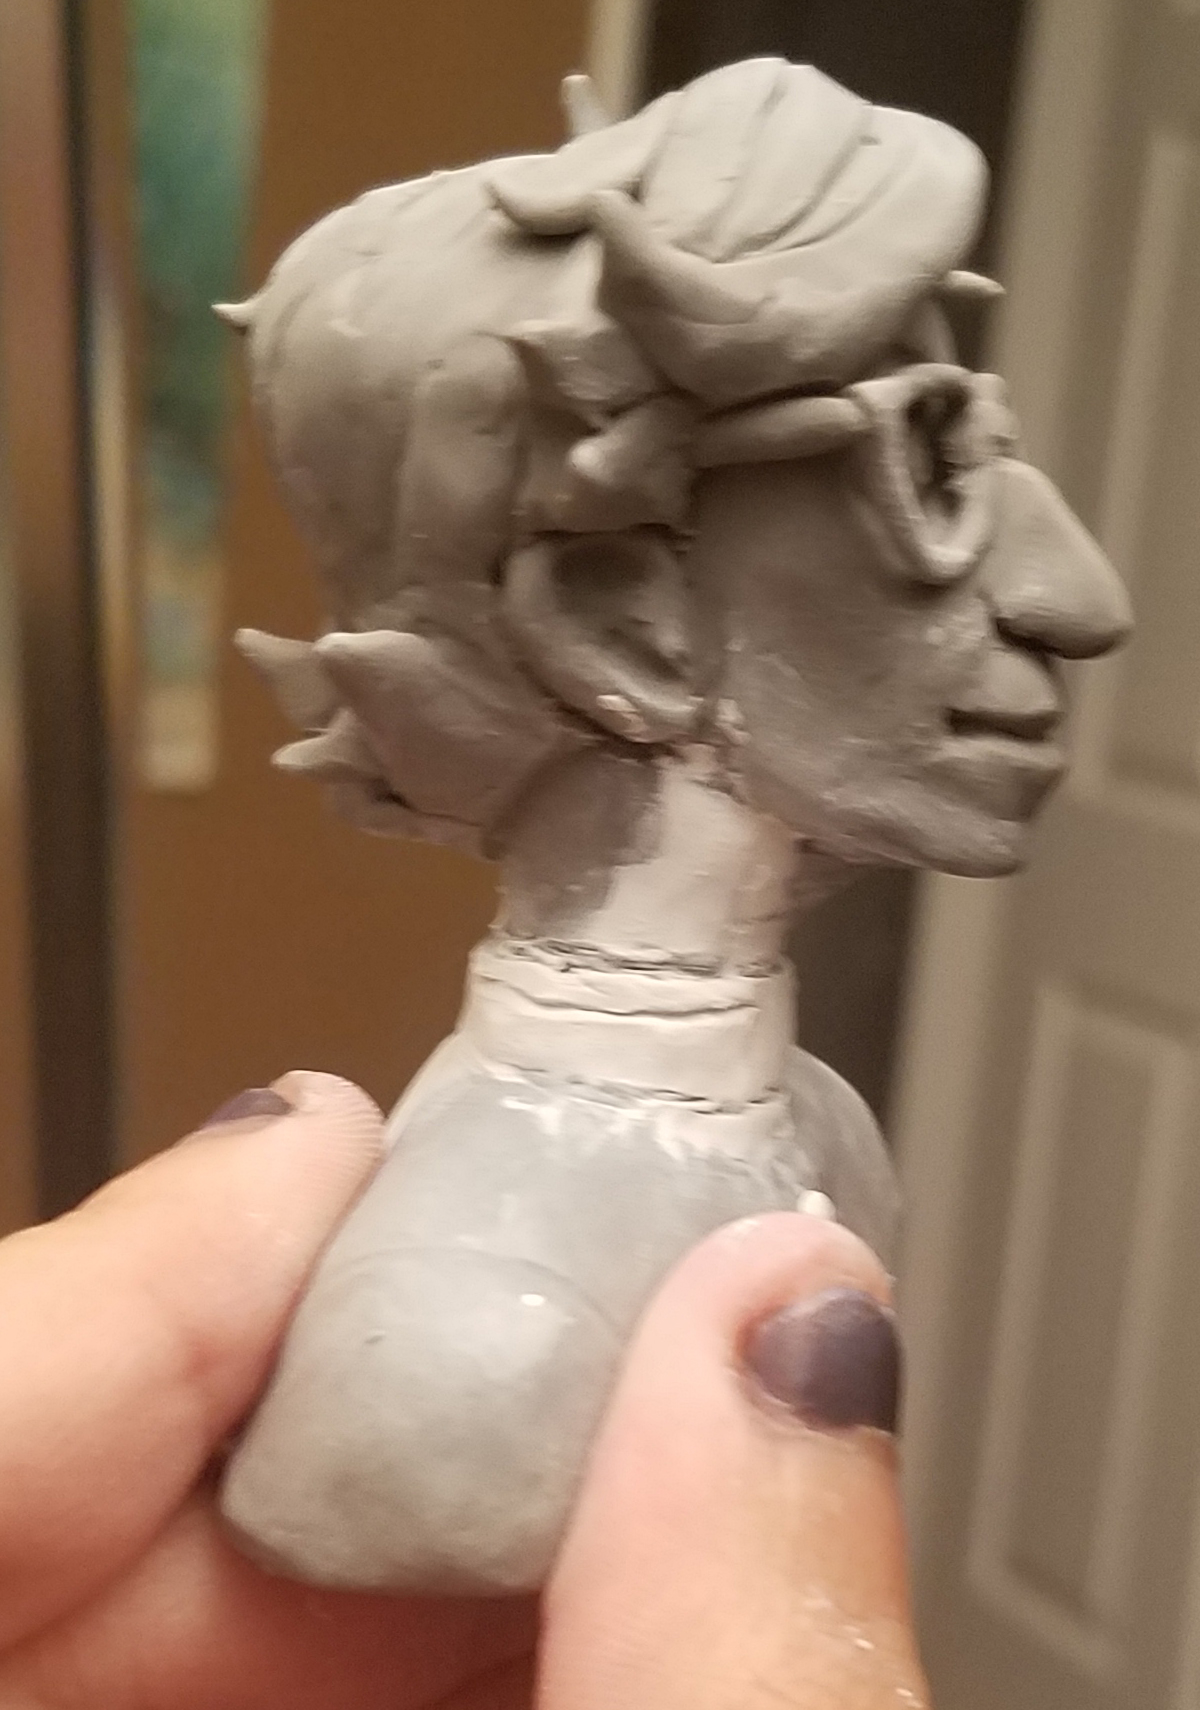 Side view of the Dante bust. In progress sculpting.